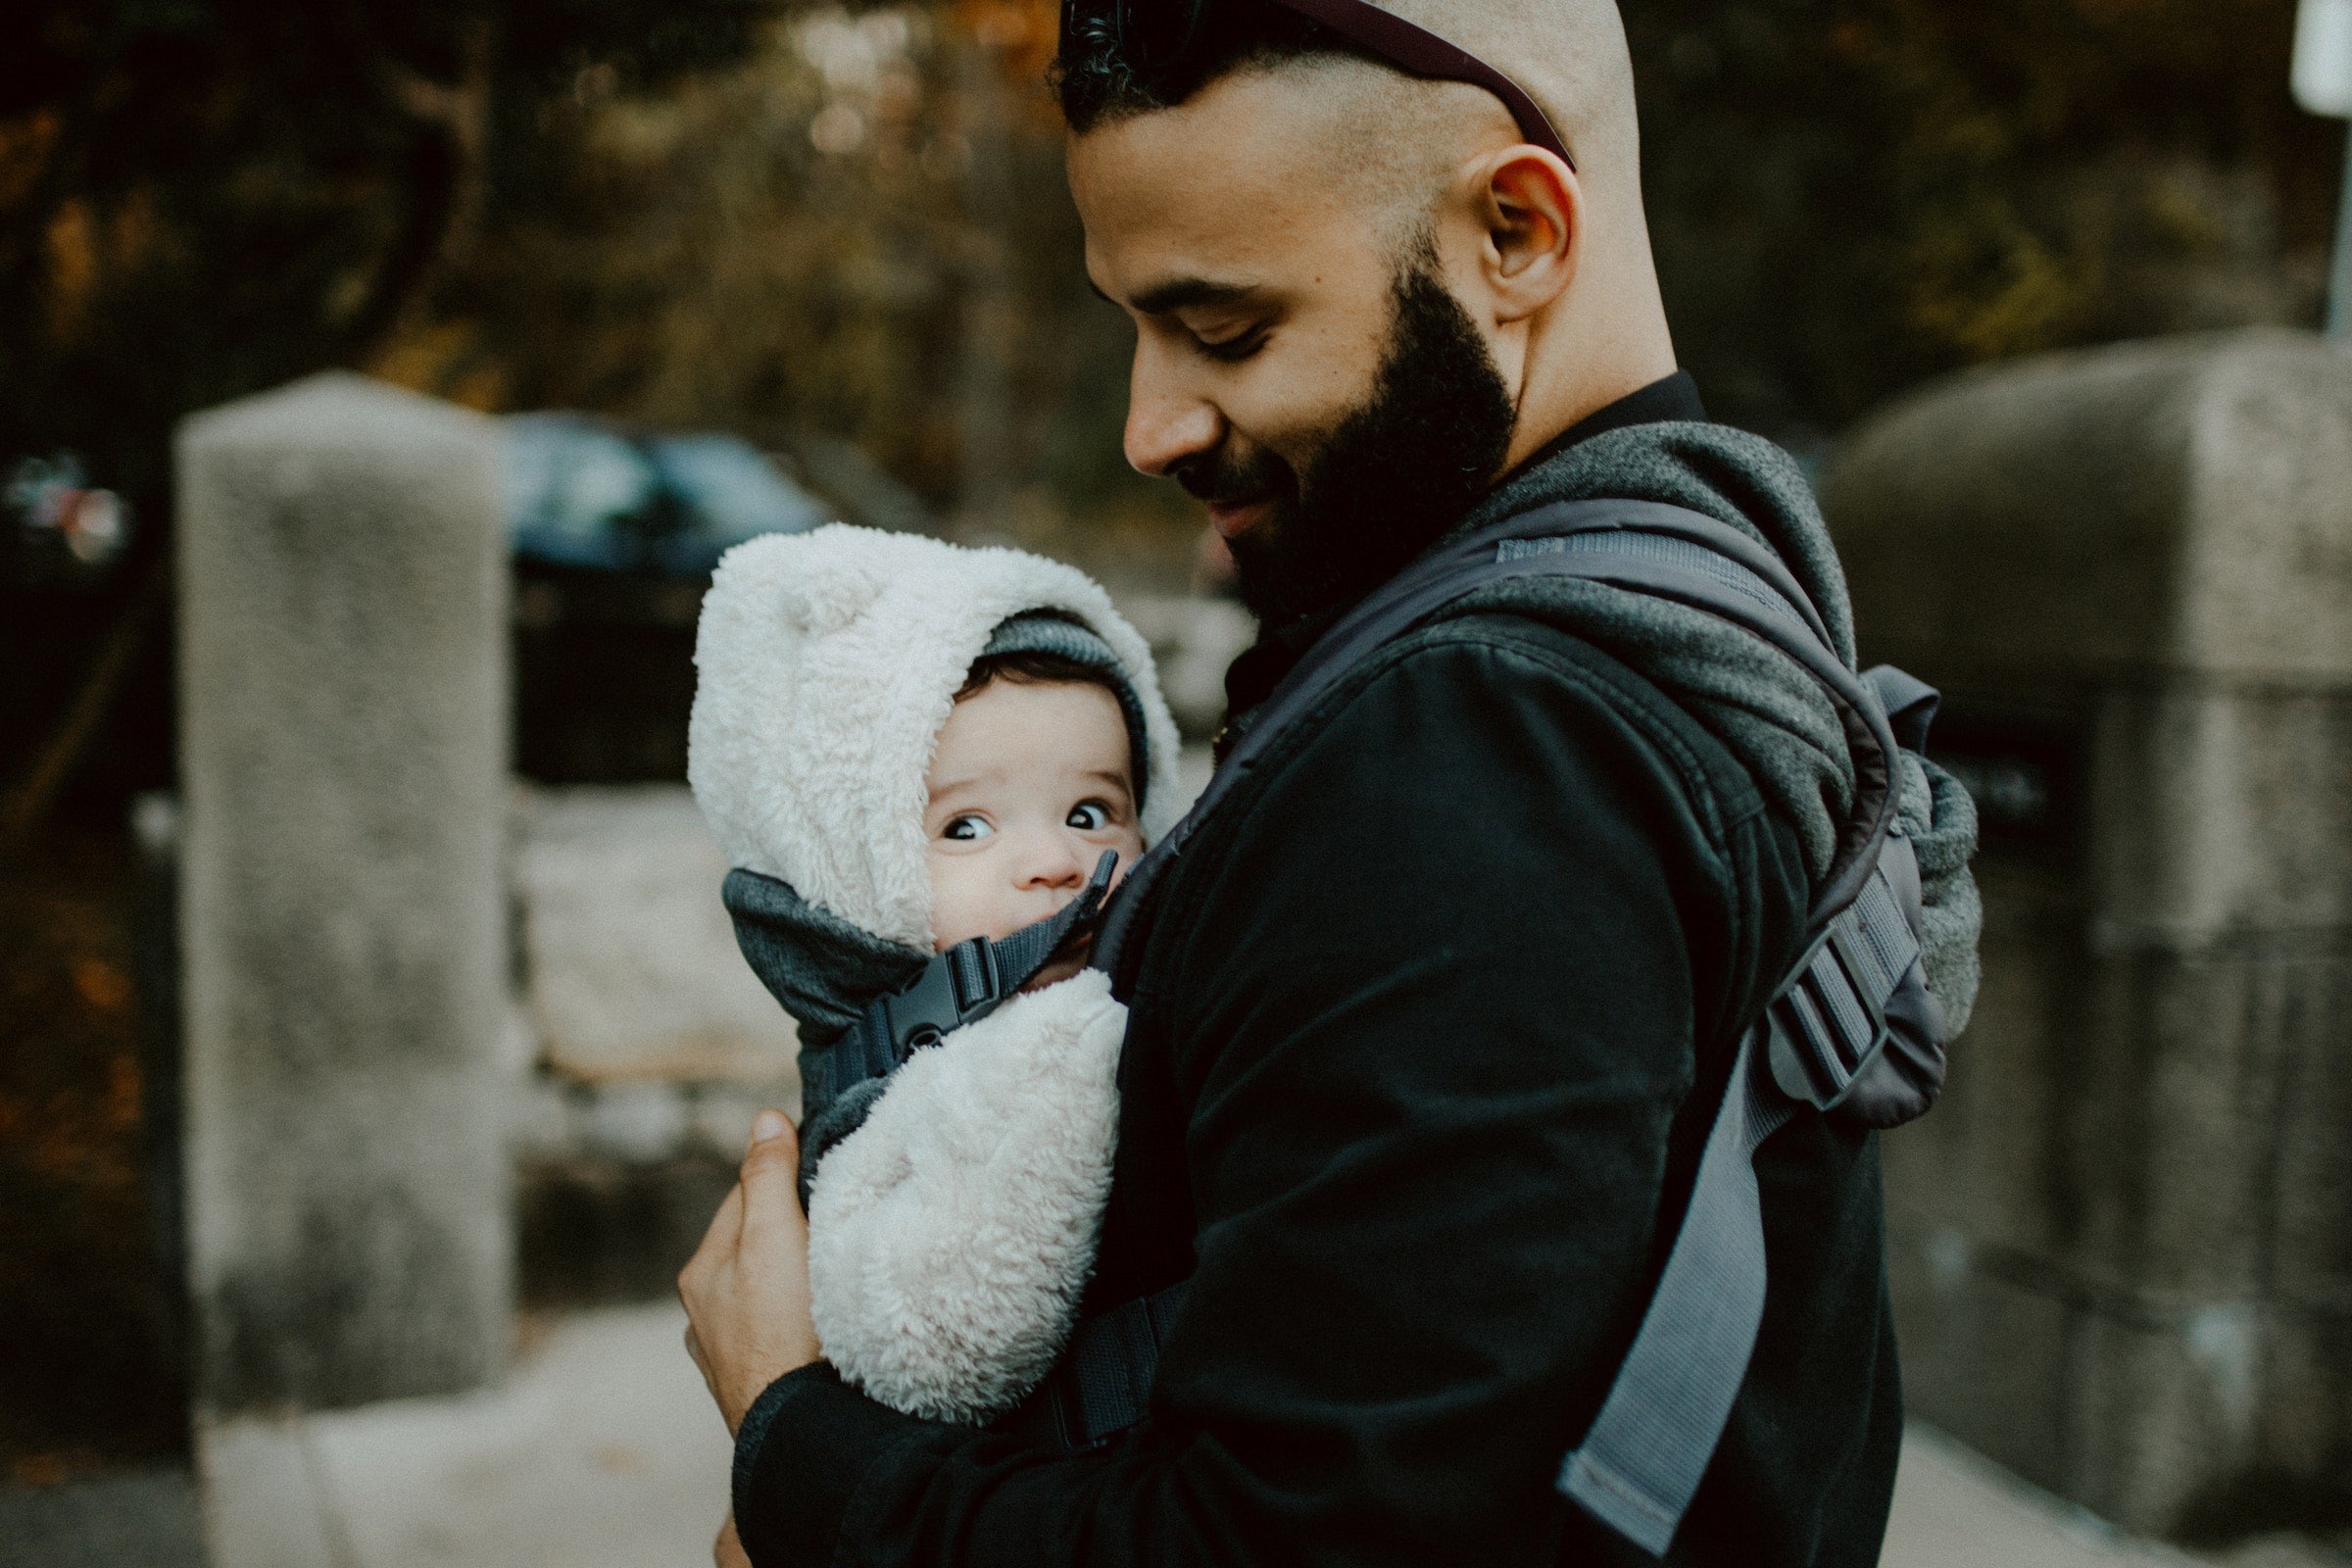 dad holding a baby in a baby carrier